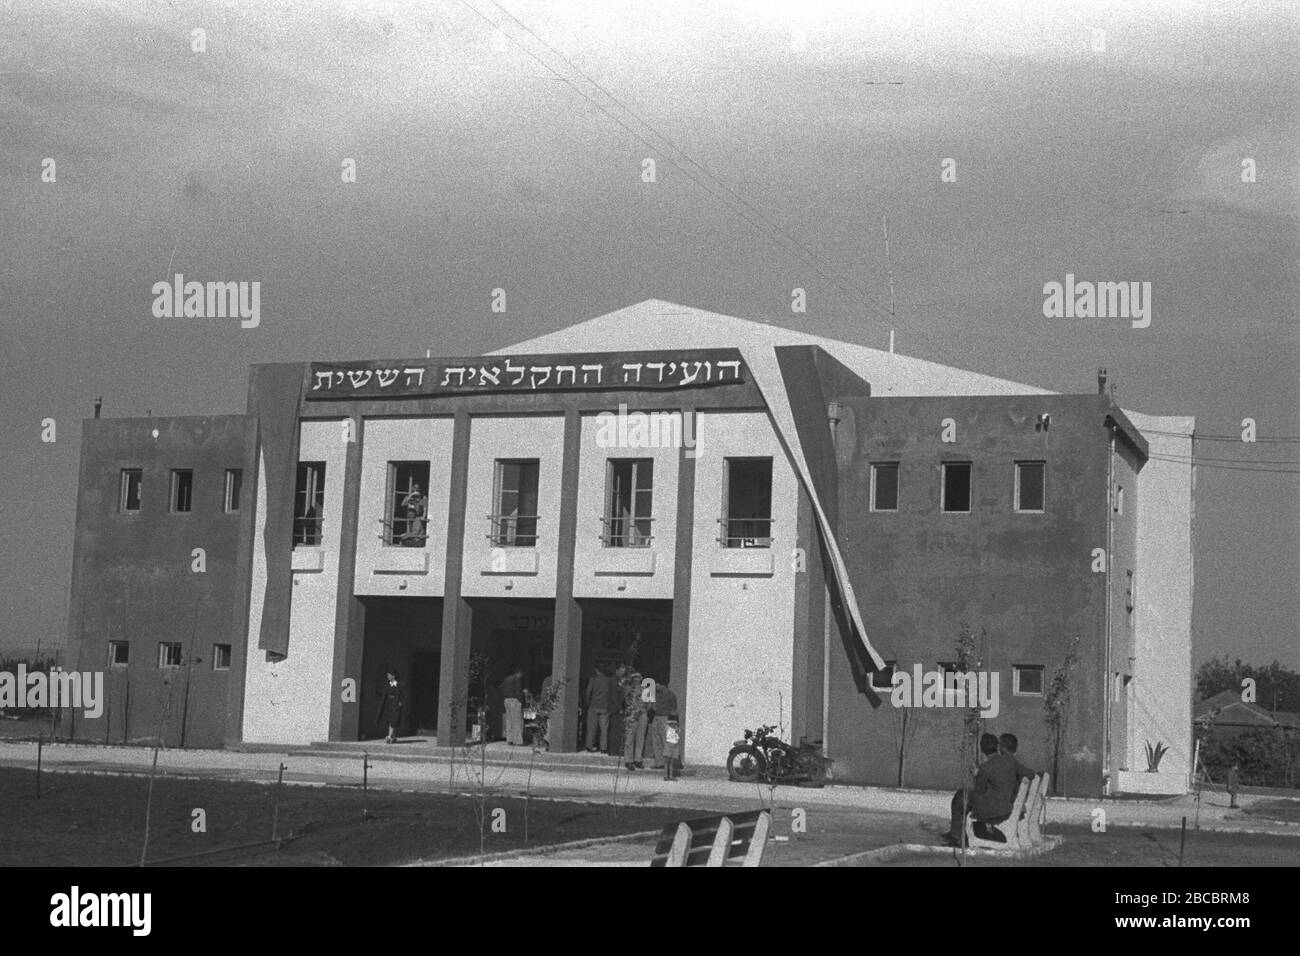 English A General View Of The Kfar Saba Worker S Building During The 6th Agricultural Conference U E I O U U O C U U E I E O I I U O U E O E E I I O I I I O Ss U E O